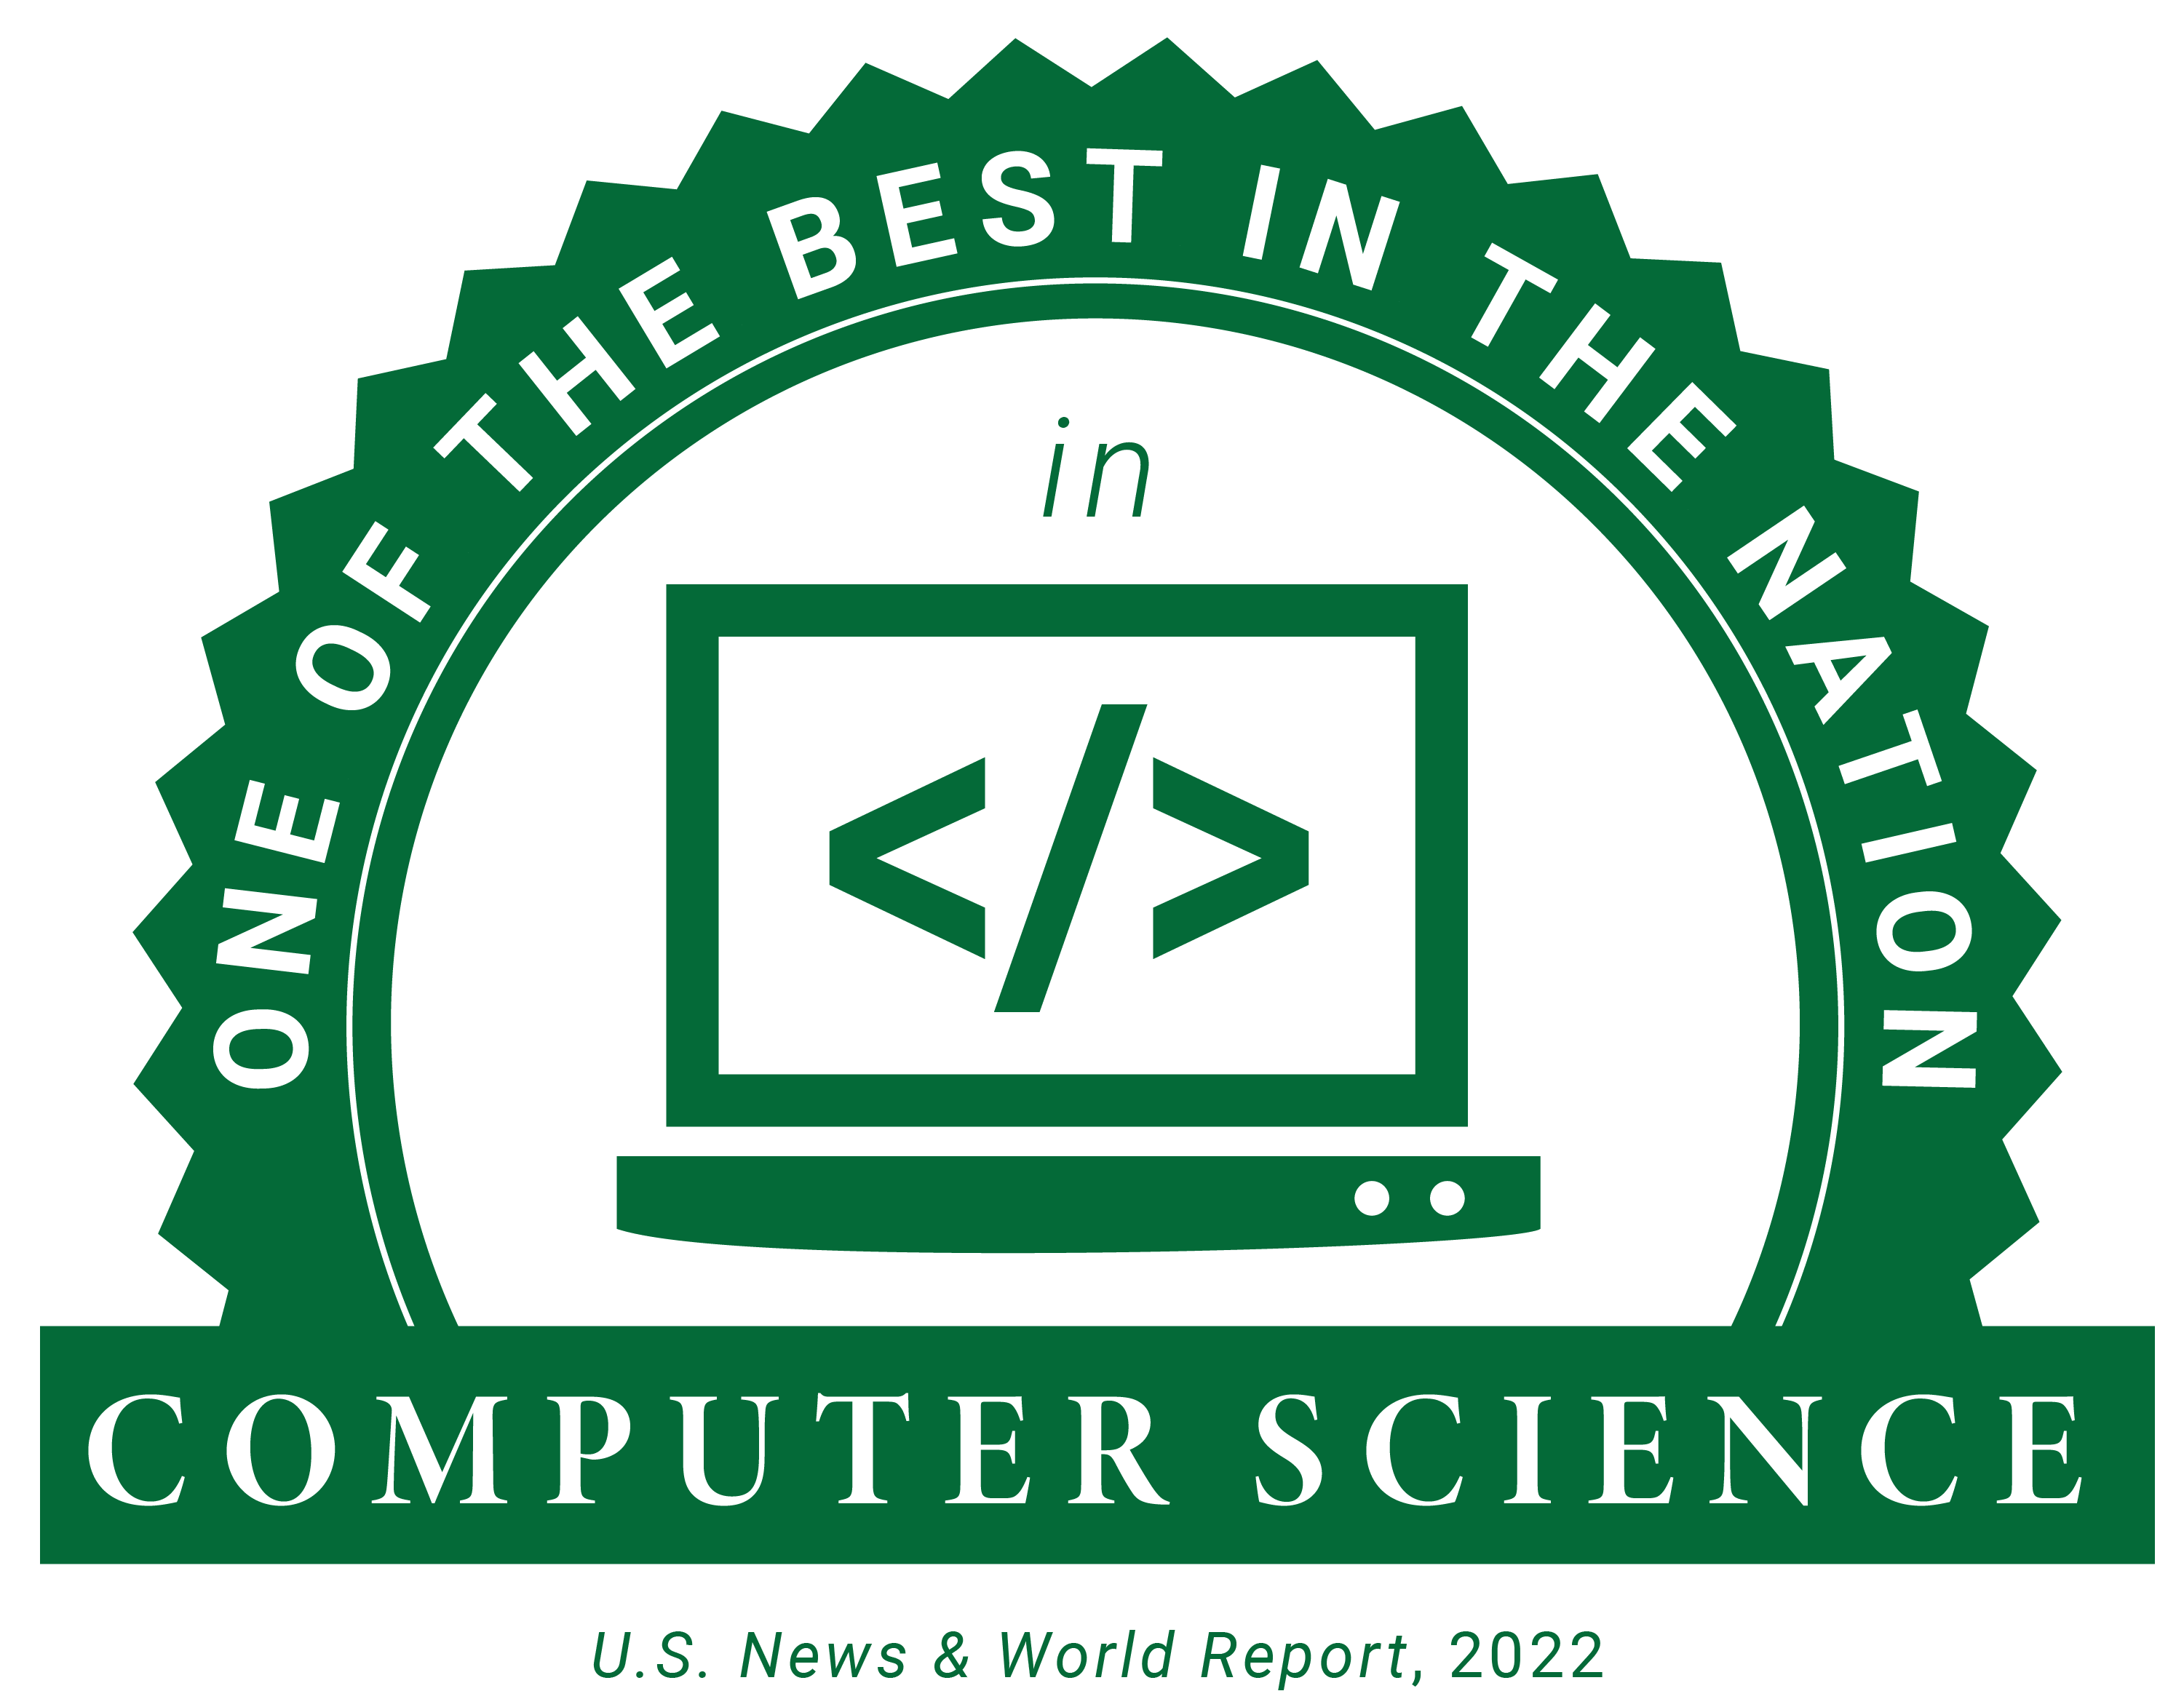 2022 U.S. News & World Report One of the Best in the Nation in Computer Science